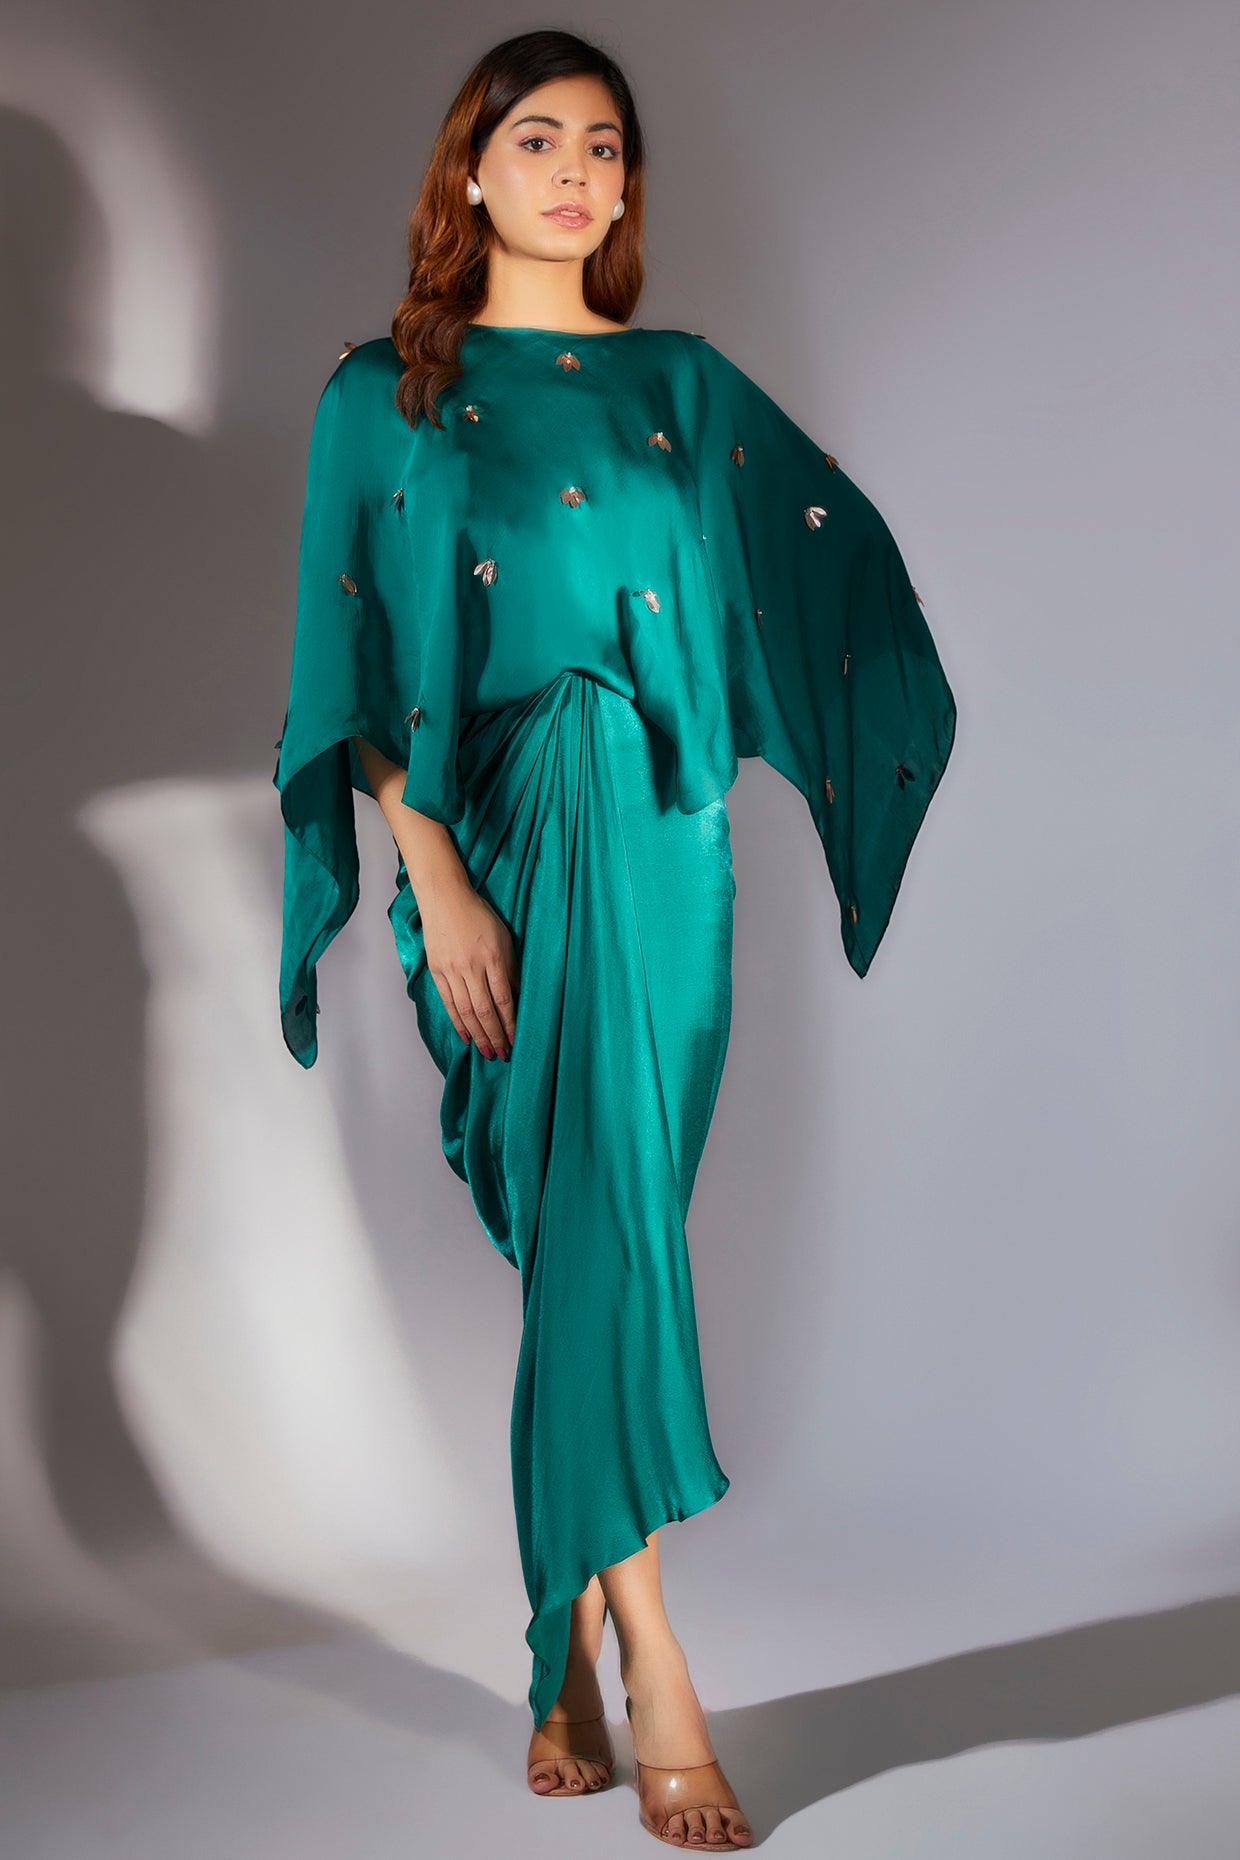 Teal Green Embroidered Drape Dress